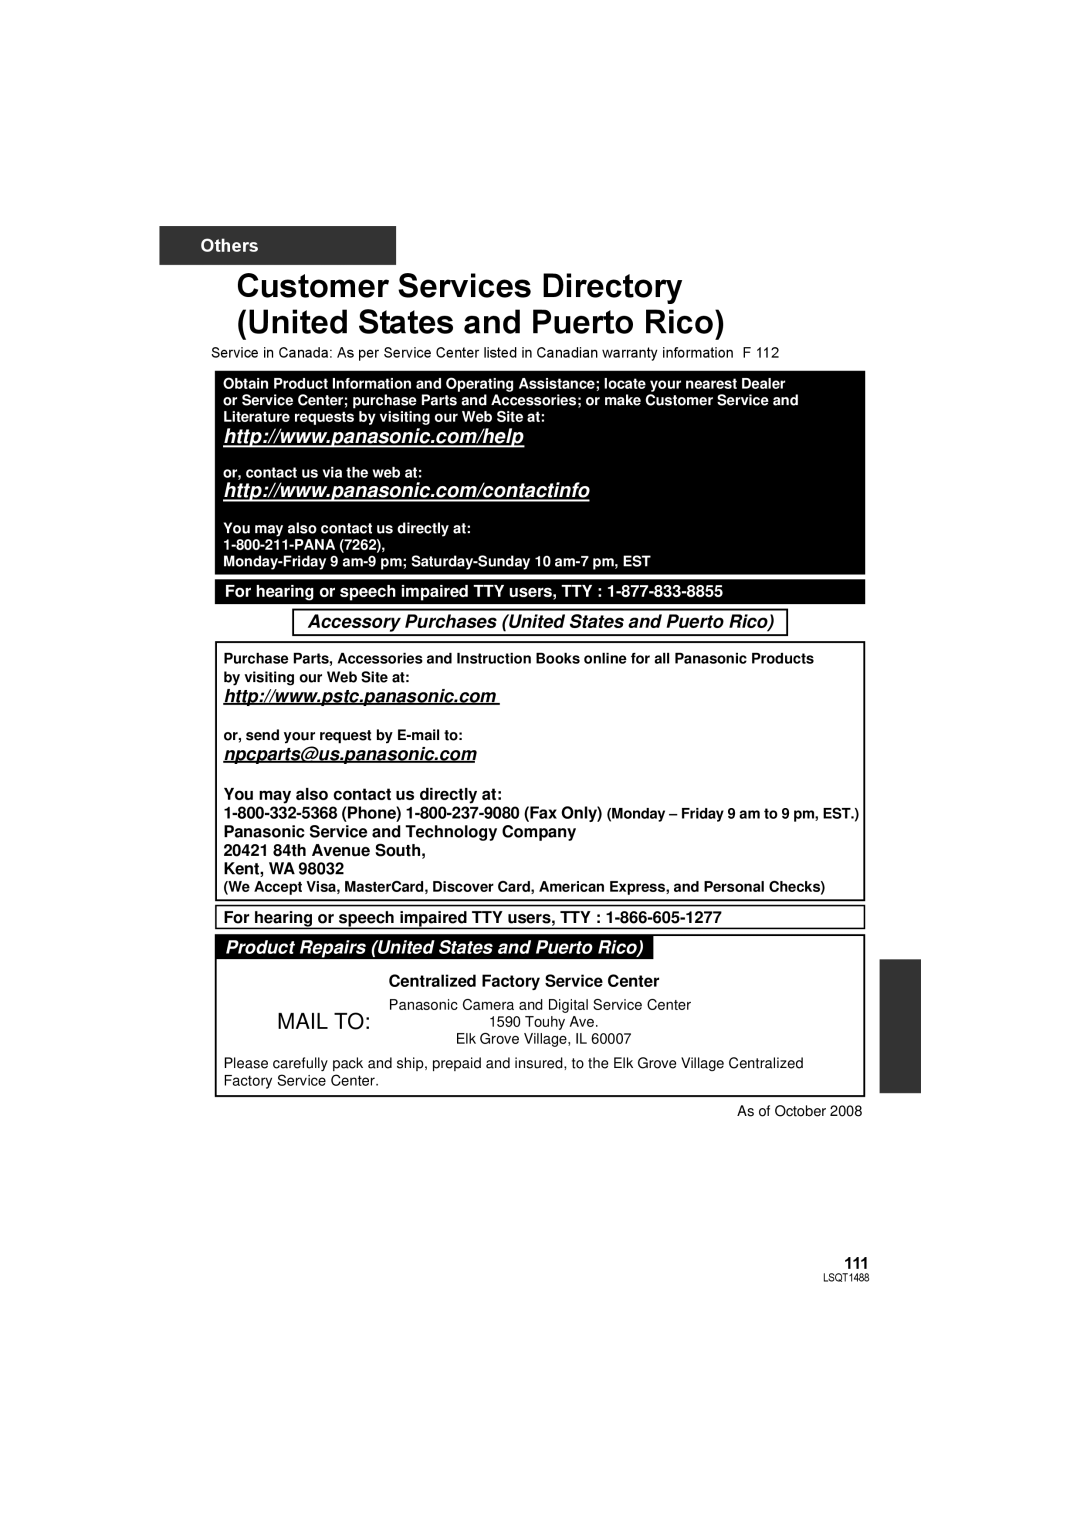 Panasonic SDR-S26PC operating instructions Customer Services Directory United States and Puerto Rico 